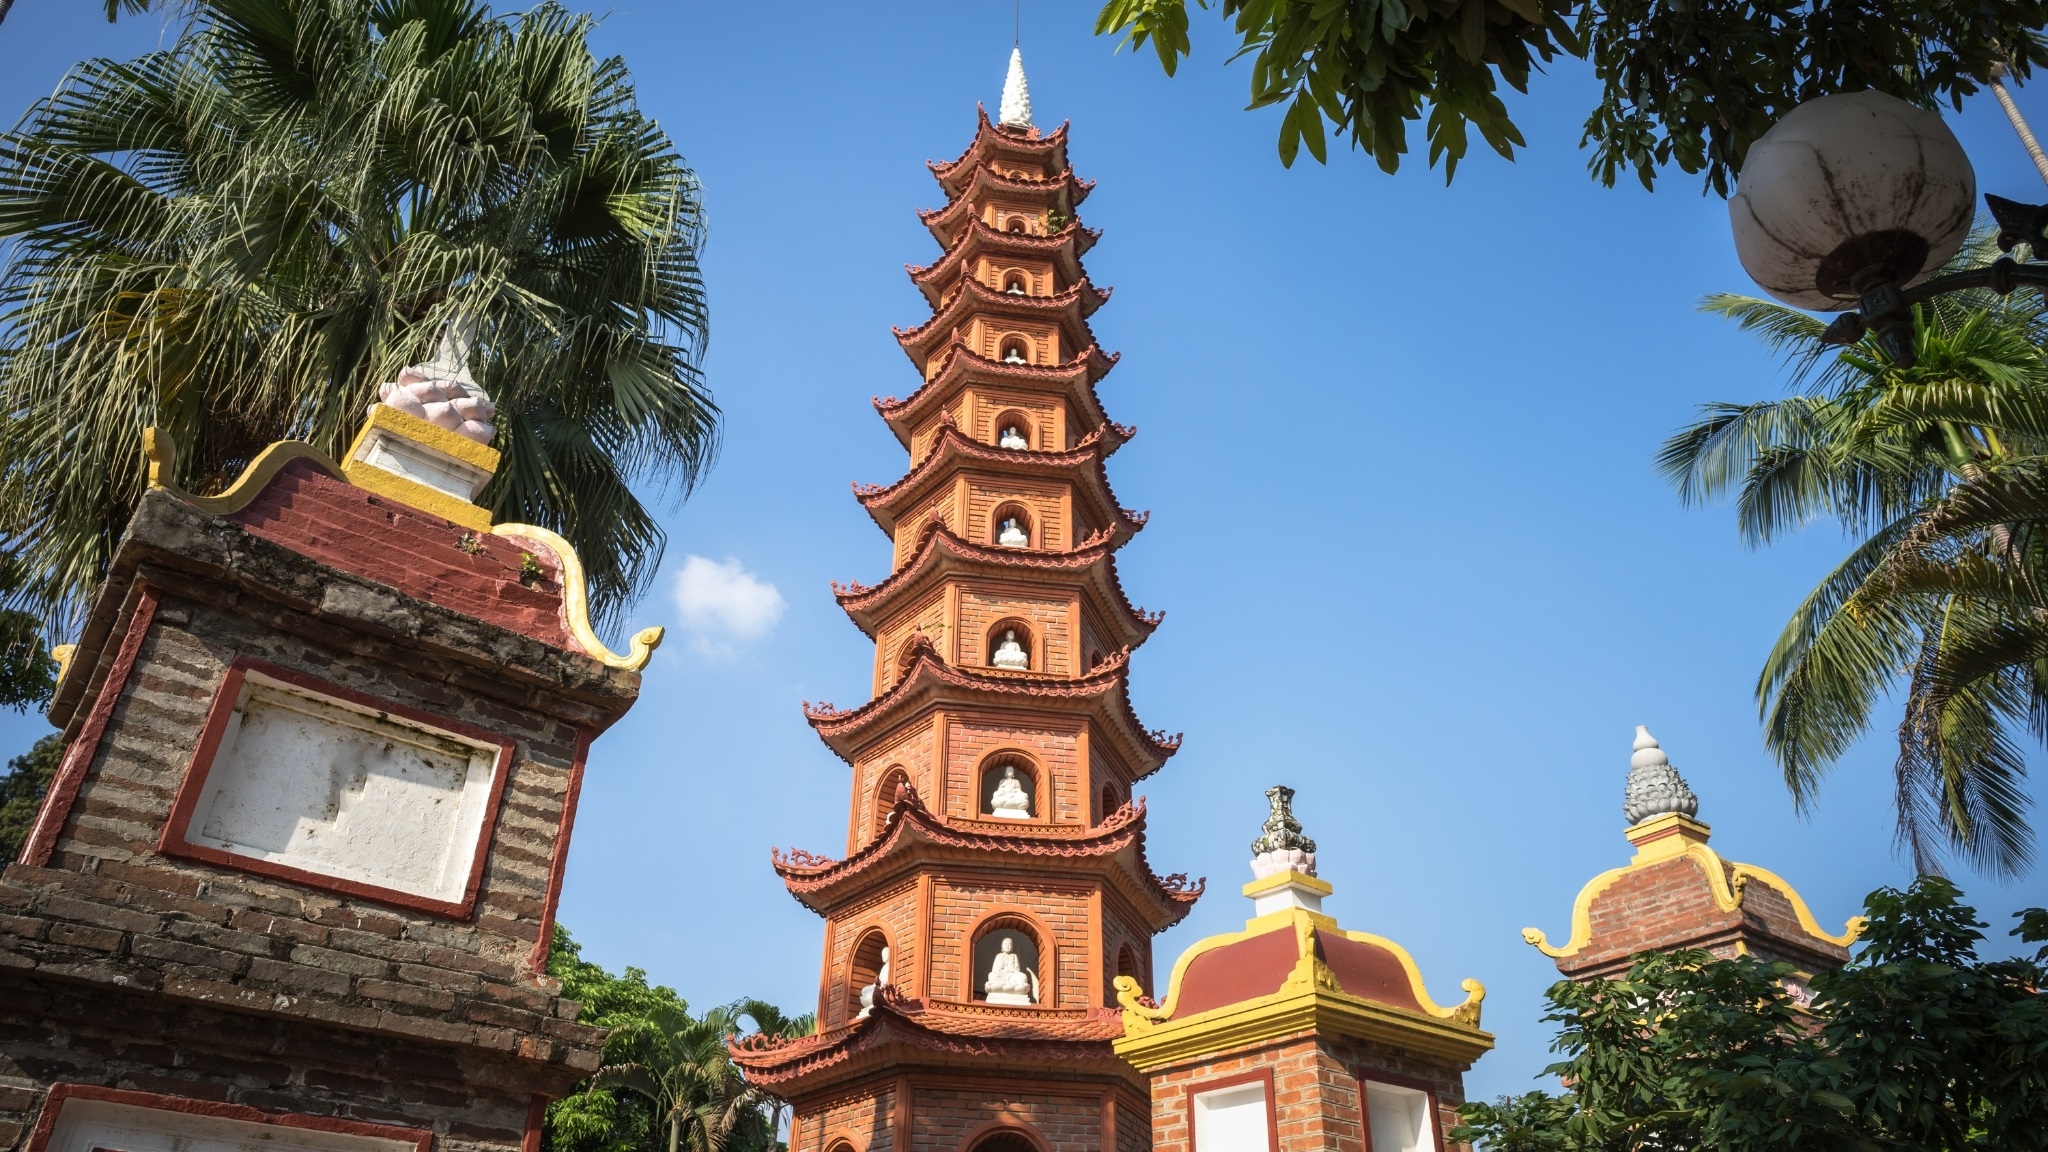 Tran Quoc Pagoda Is Famous For Its Profound Cultural And Buddhist Significance